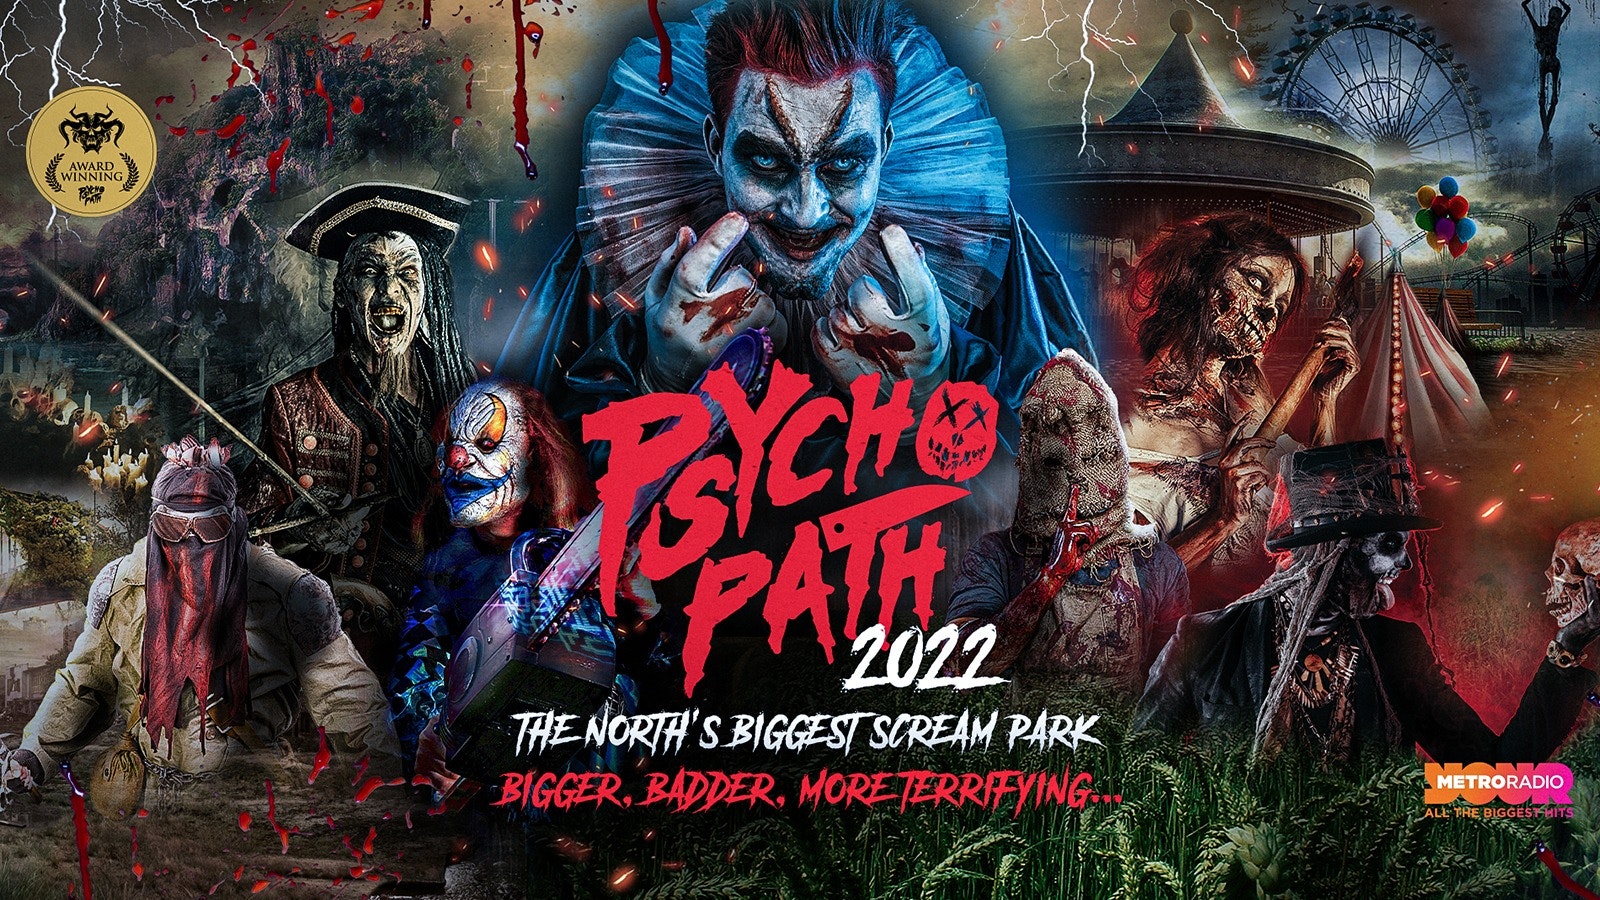 Psycho Path Presents FearGround – Oct 8th